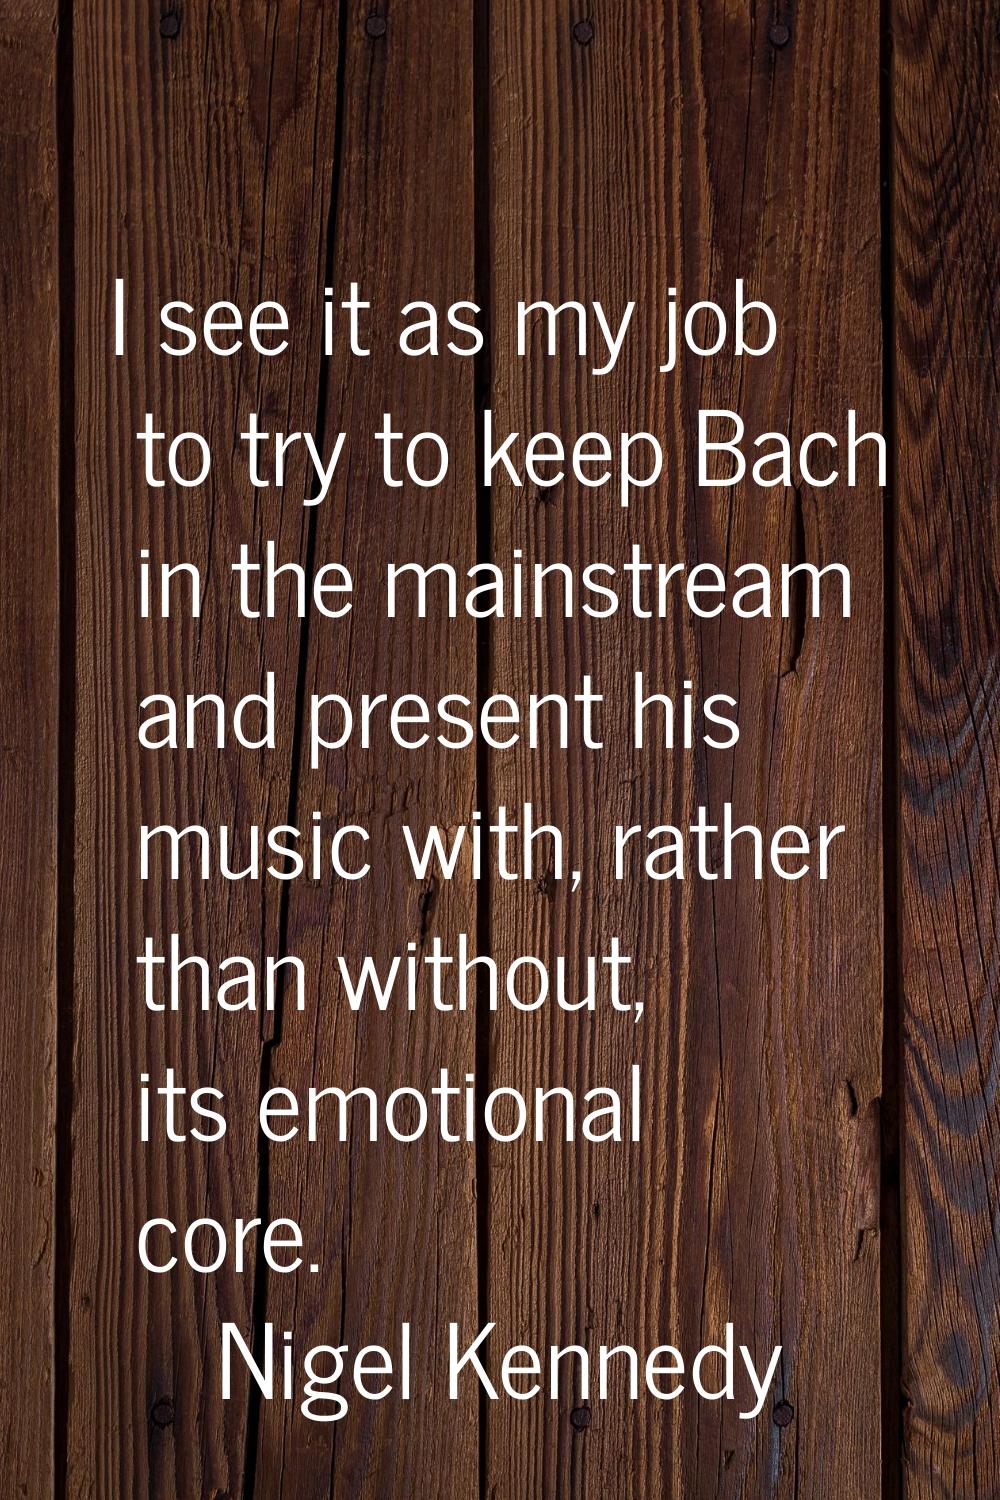 I see it as my job to try to keep Bach in the mainstream and present his music with, rather than wi